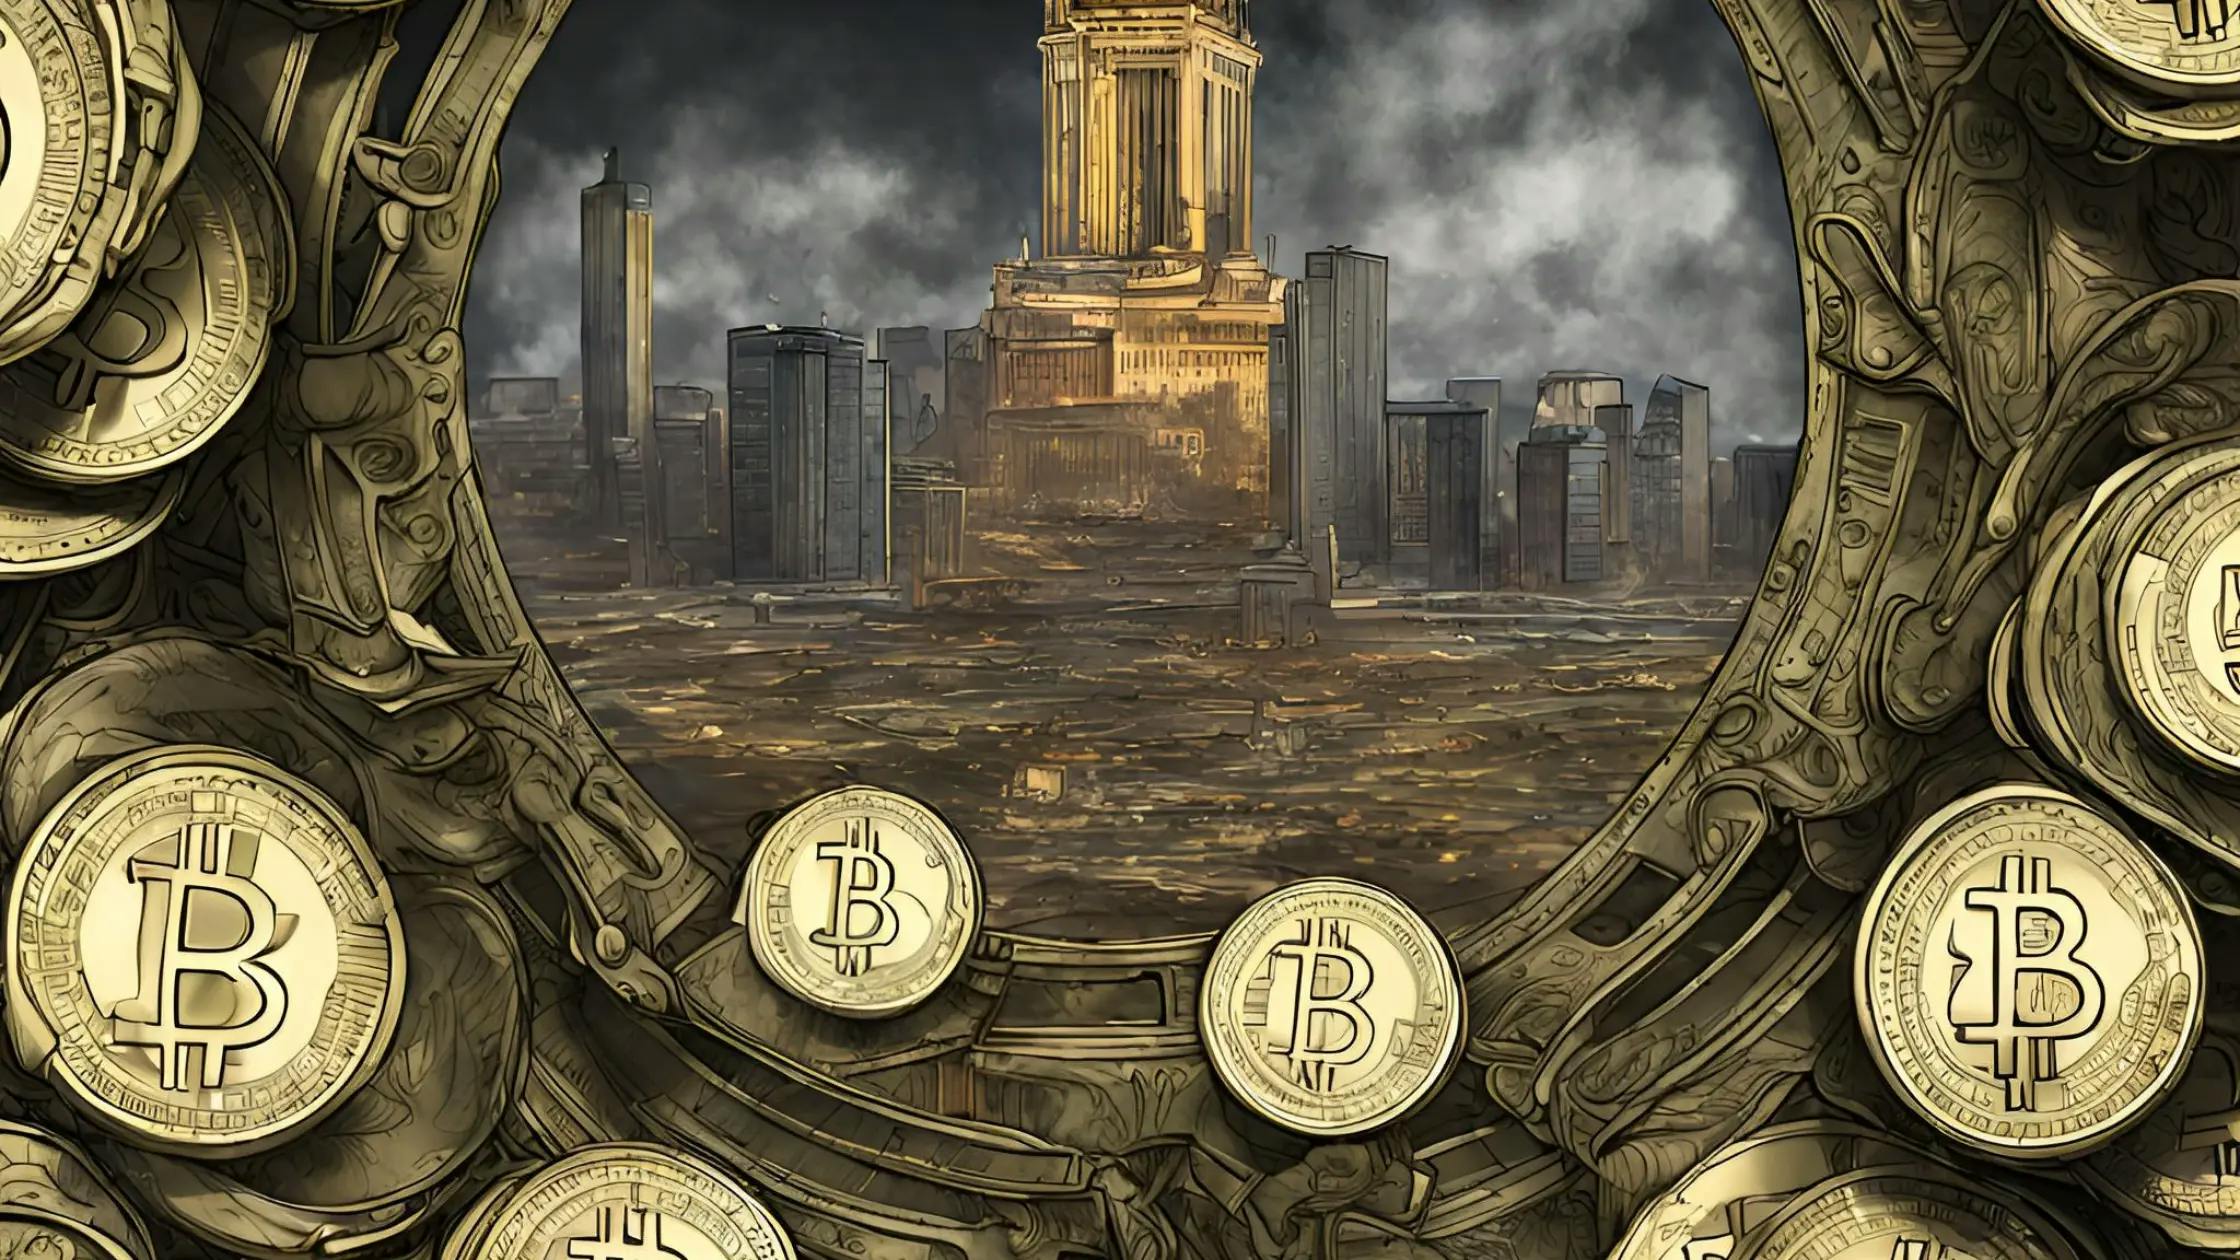 Could Bitcoin Emerge as the Global Reserve Currency After World War III?